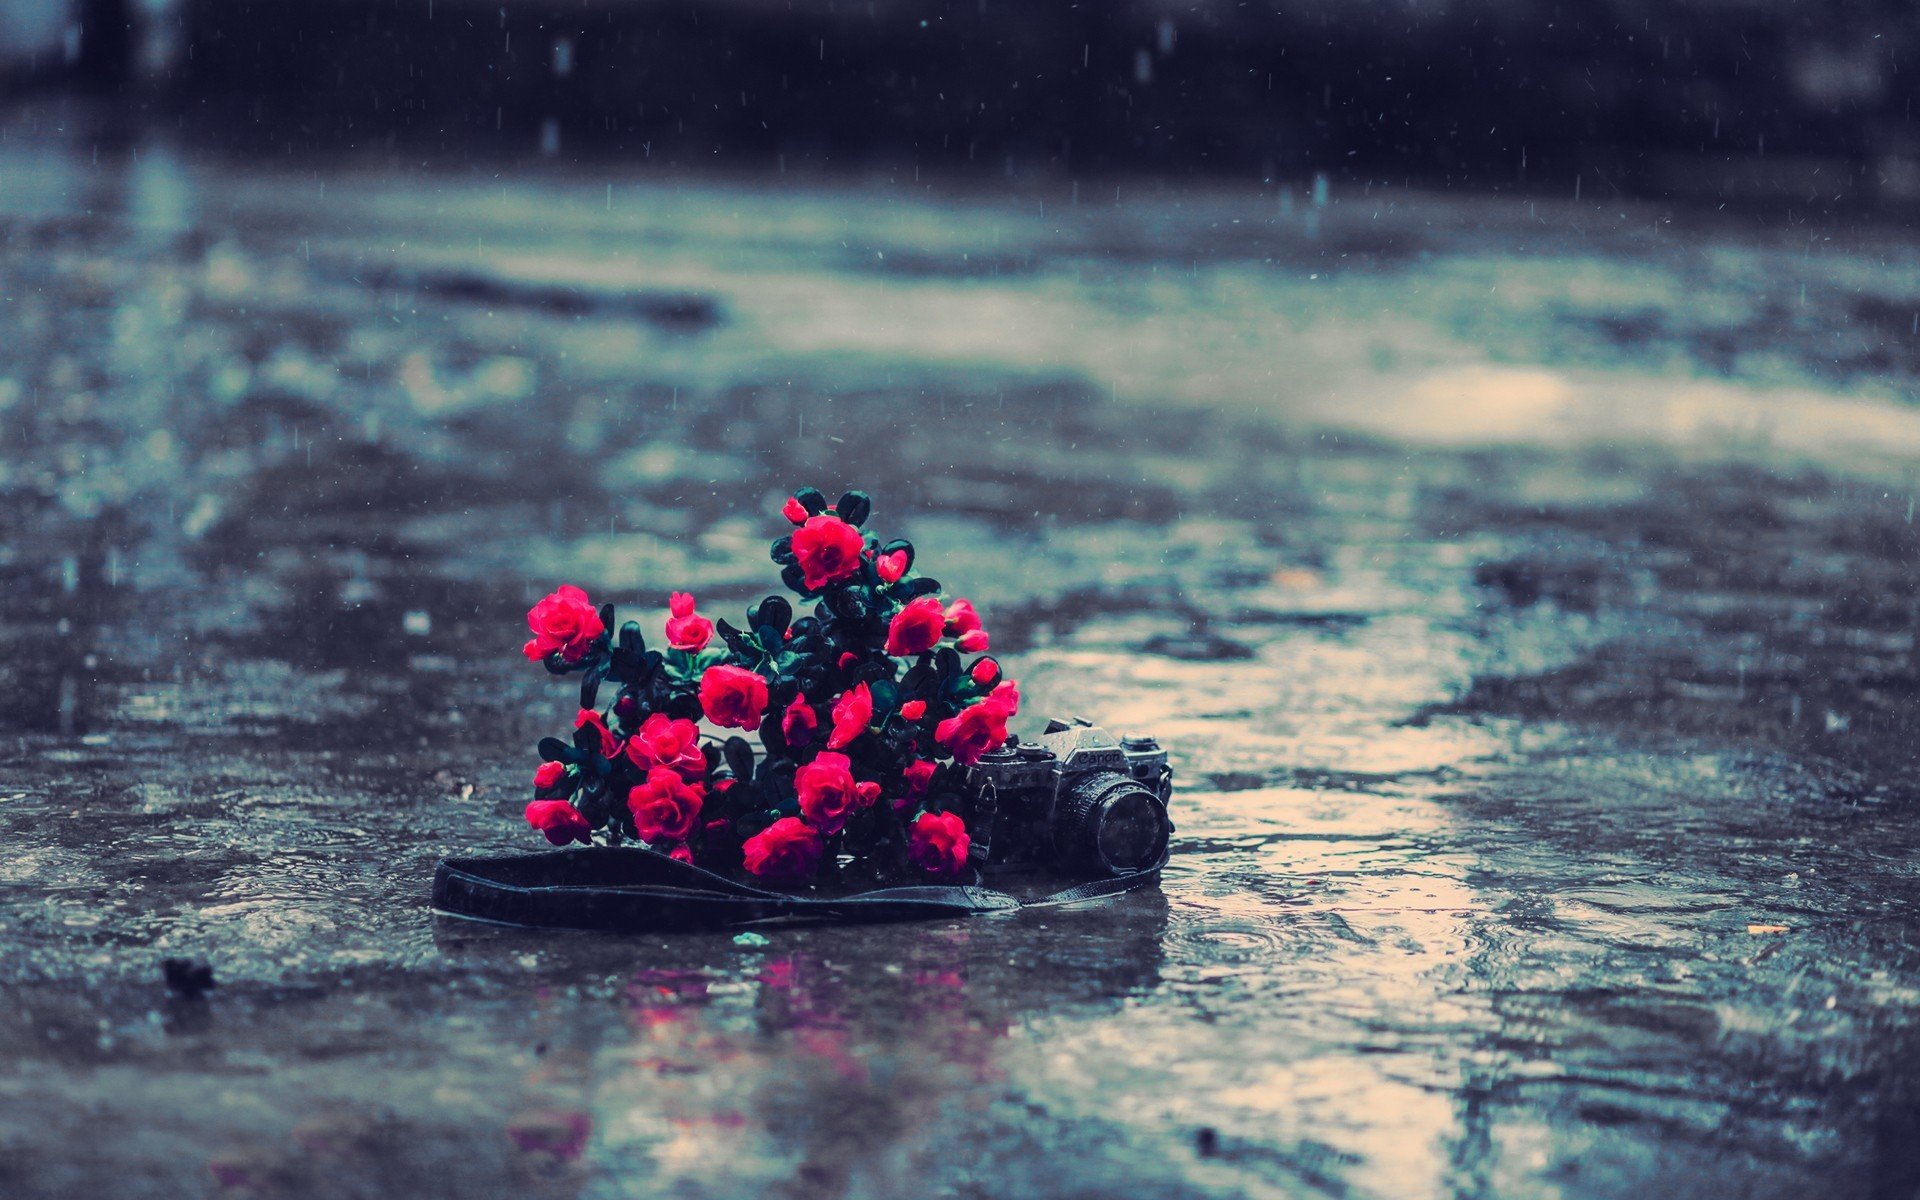  the rainy wallpapers category of free hd wallpapers wallpaper rainy is